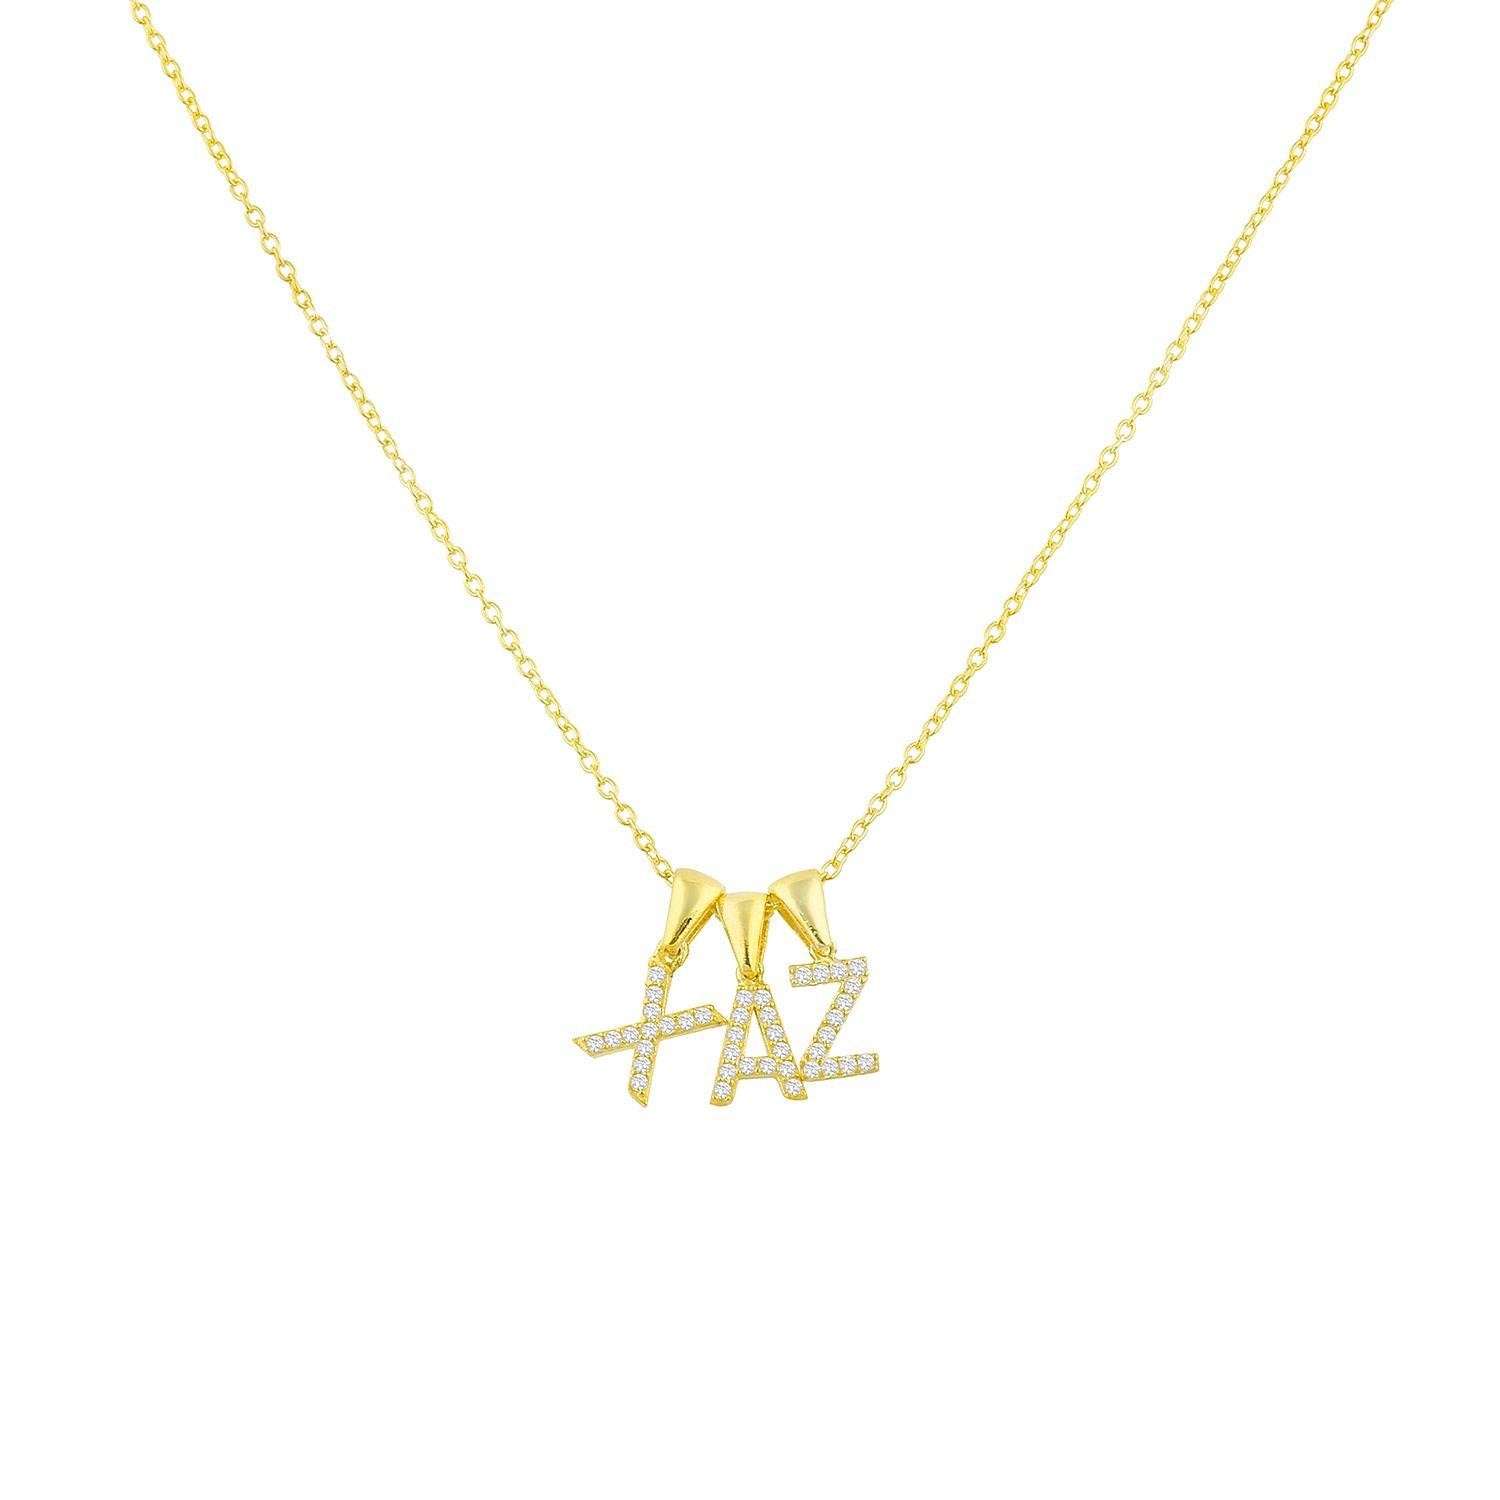 Custom Layered Initial Necklace JEWELRY The Sis Kiss Three Initials Gold No Crystals